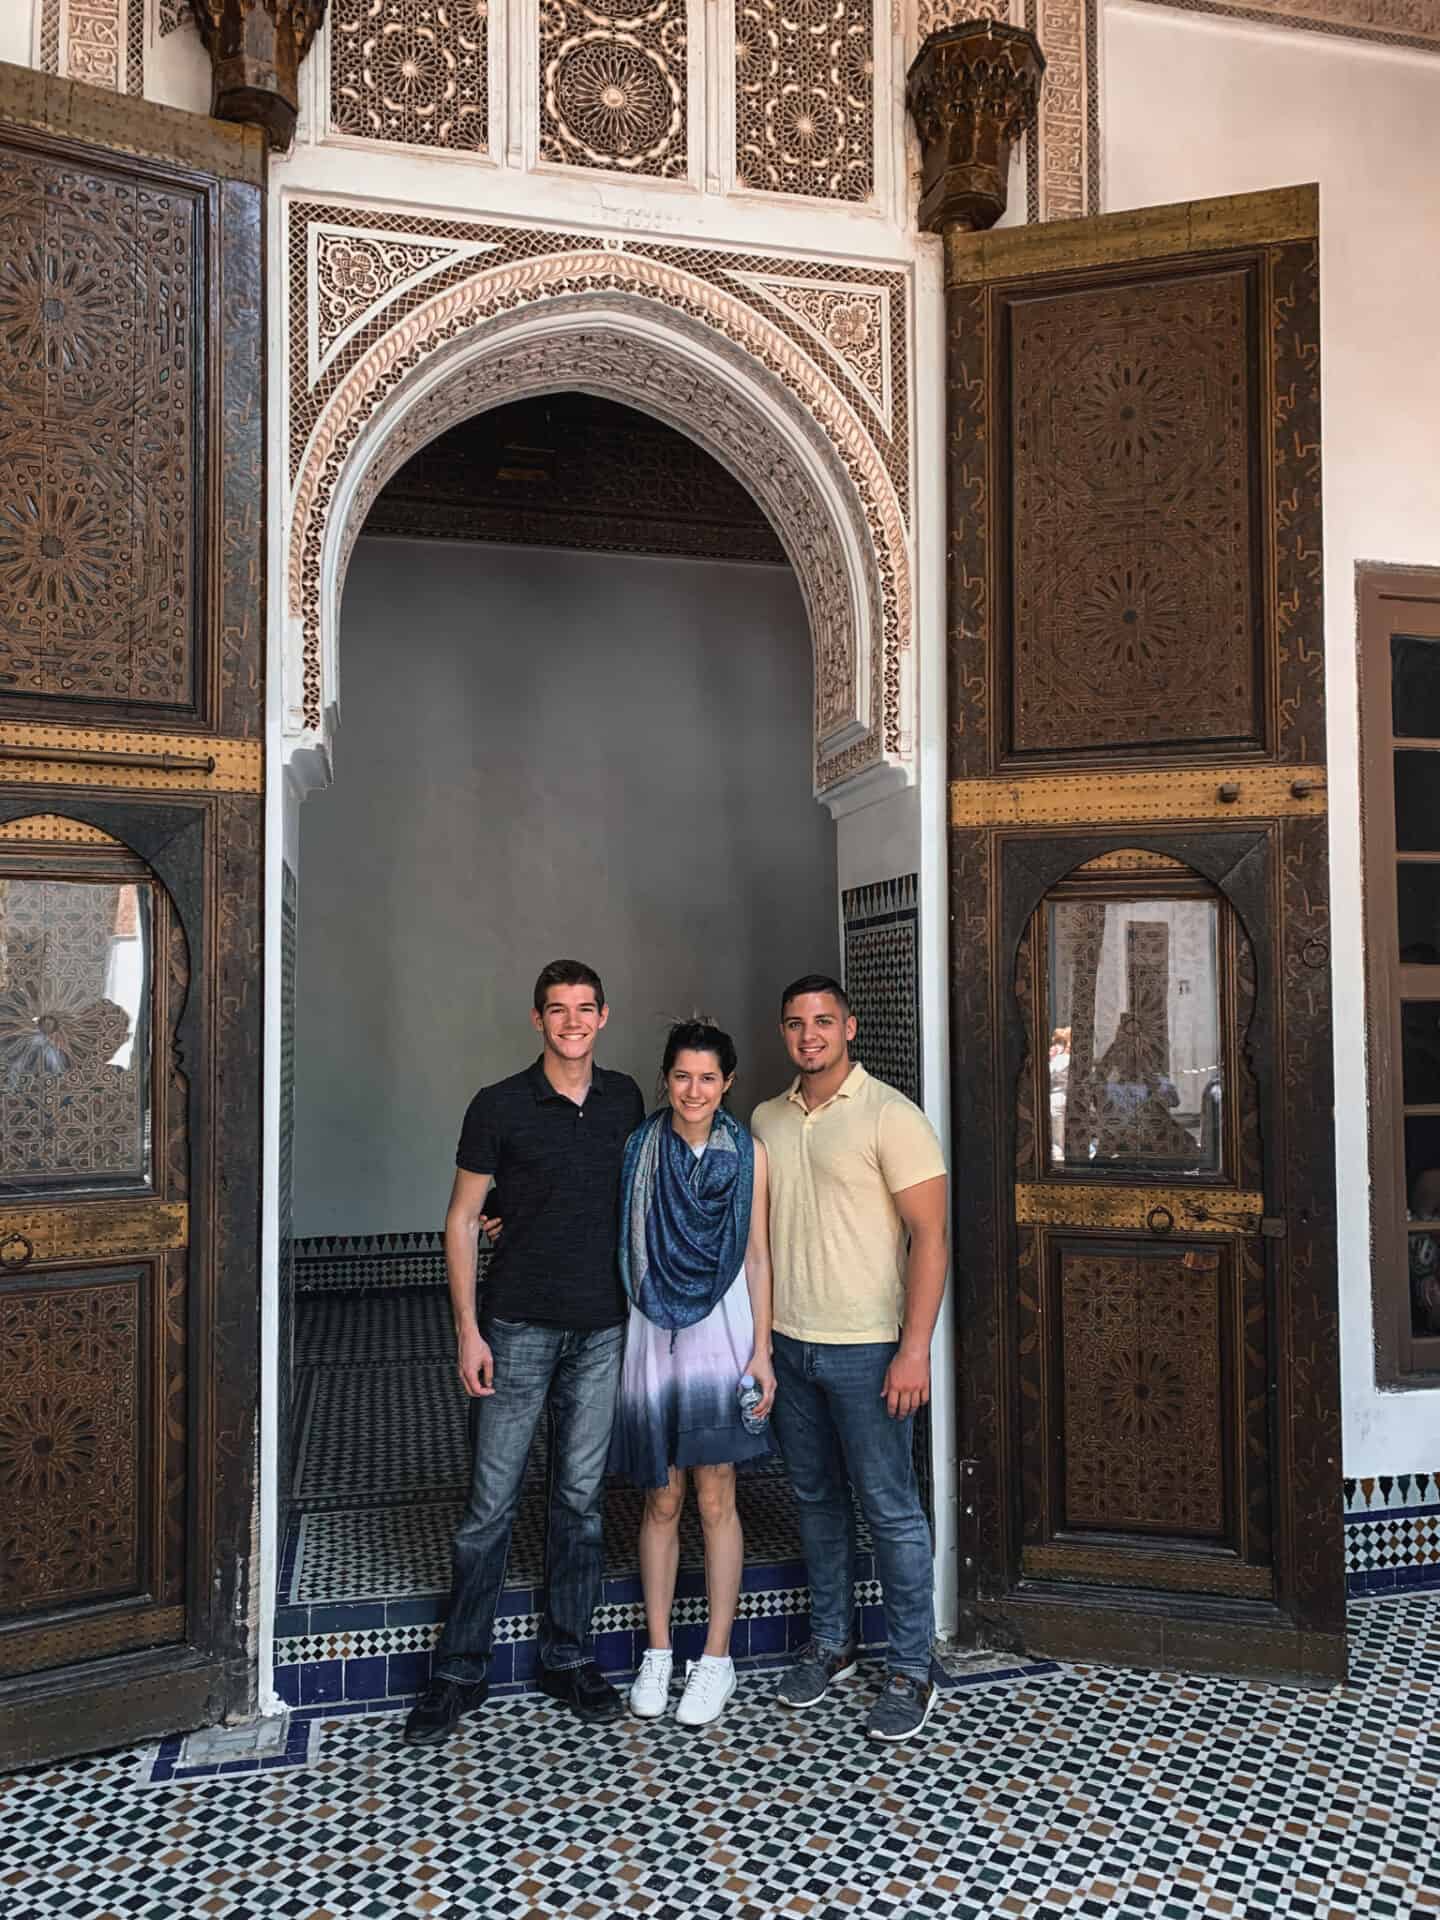 3 tourists standing in the doorway of Elaborate mosaic arch in Museum Marrakech Morocco